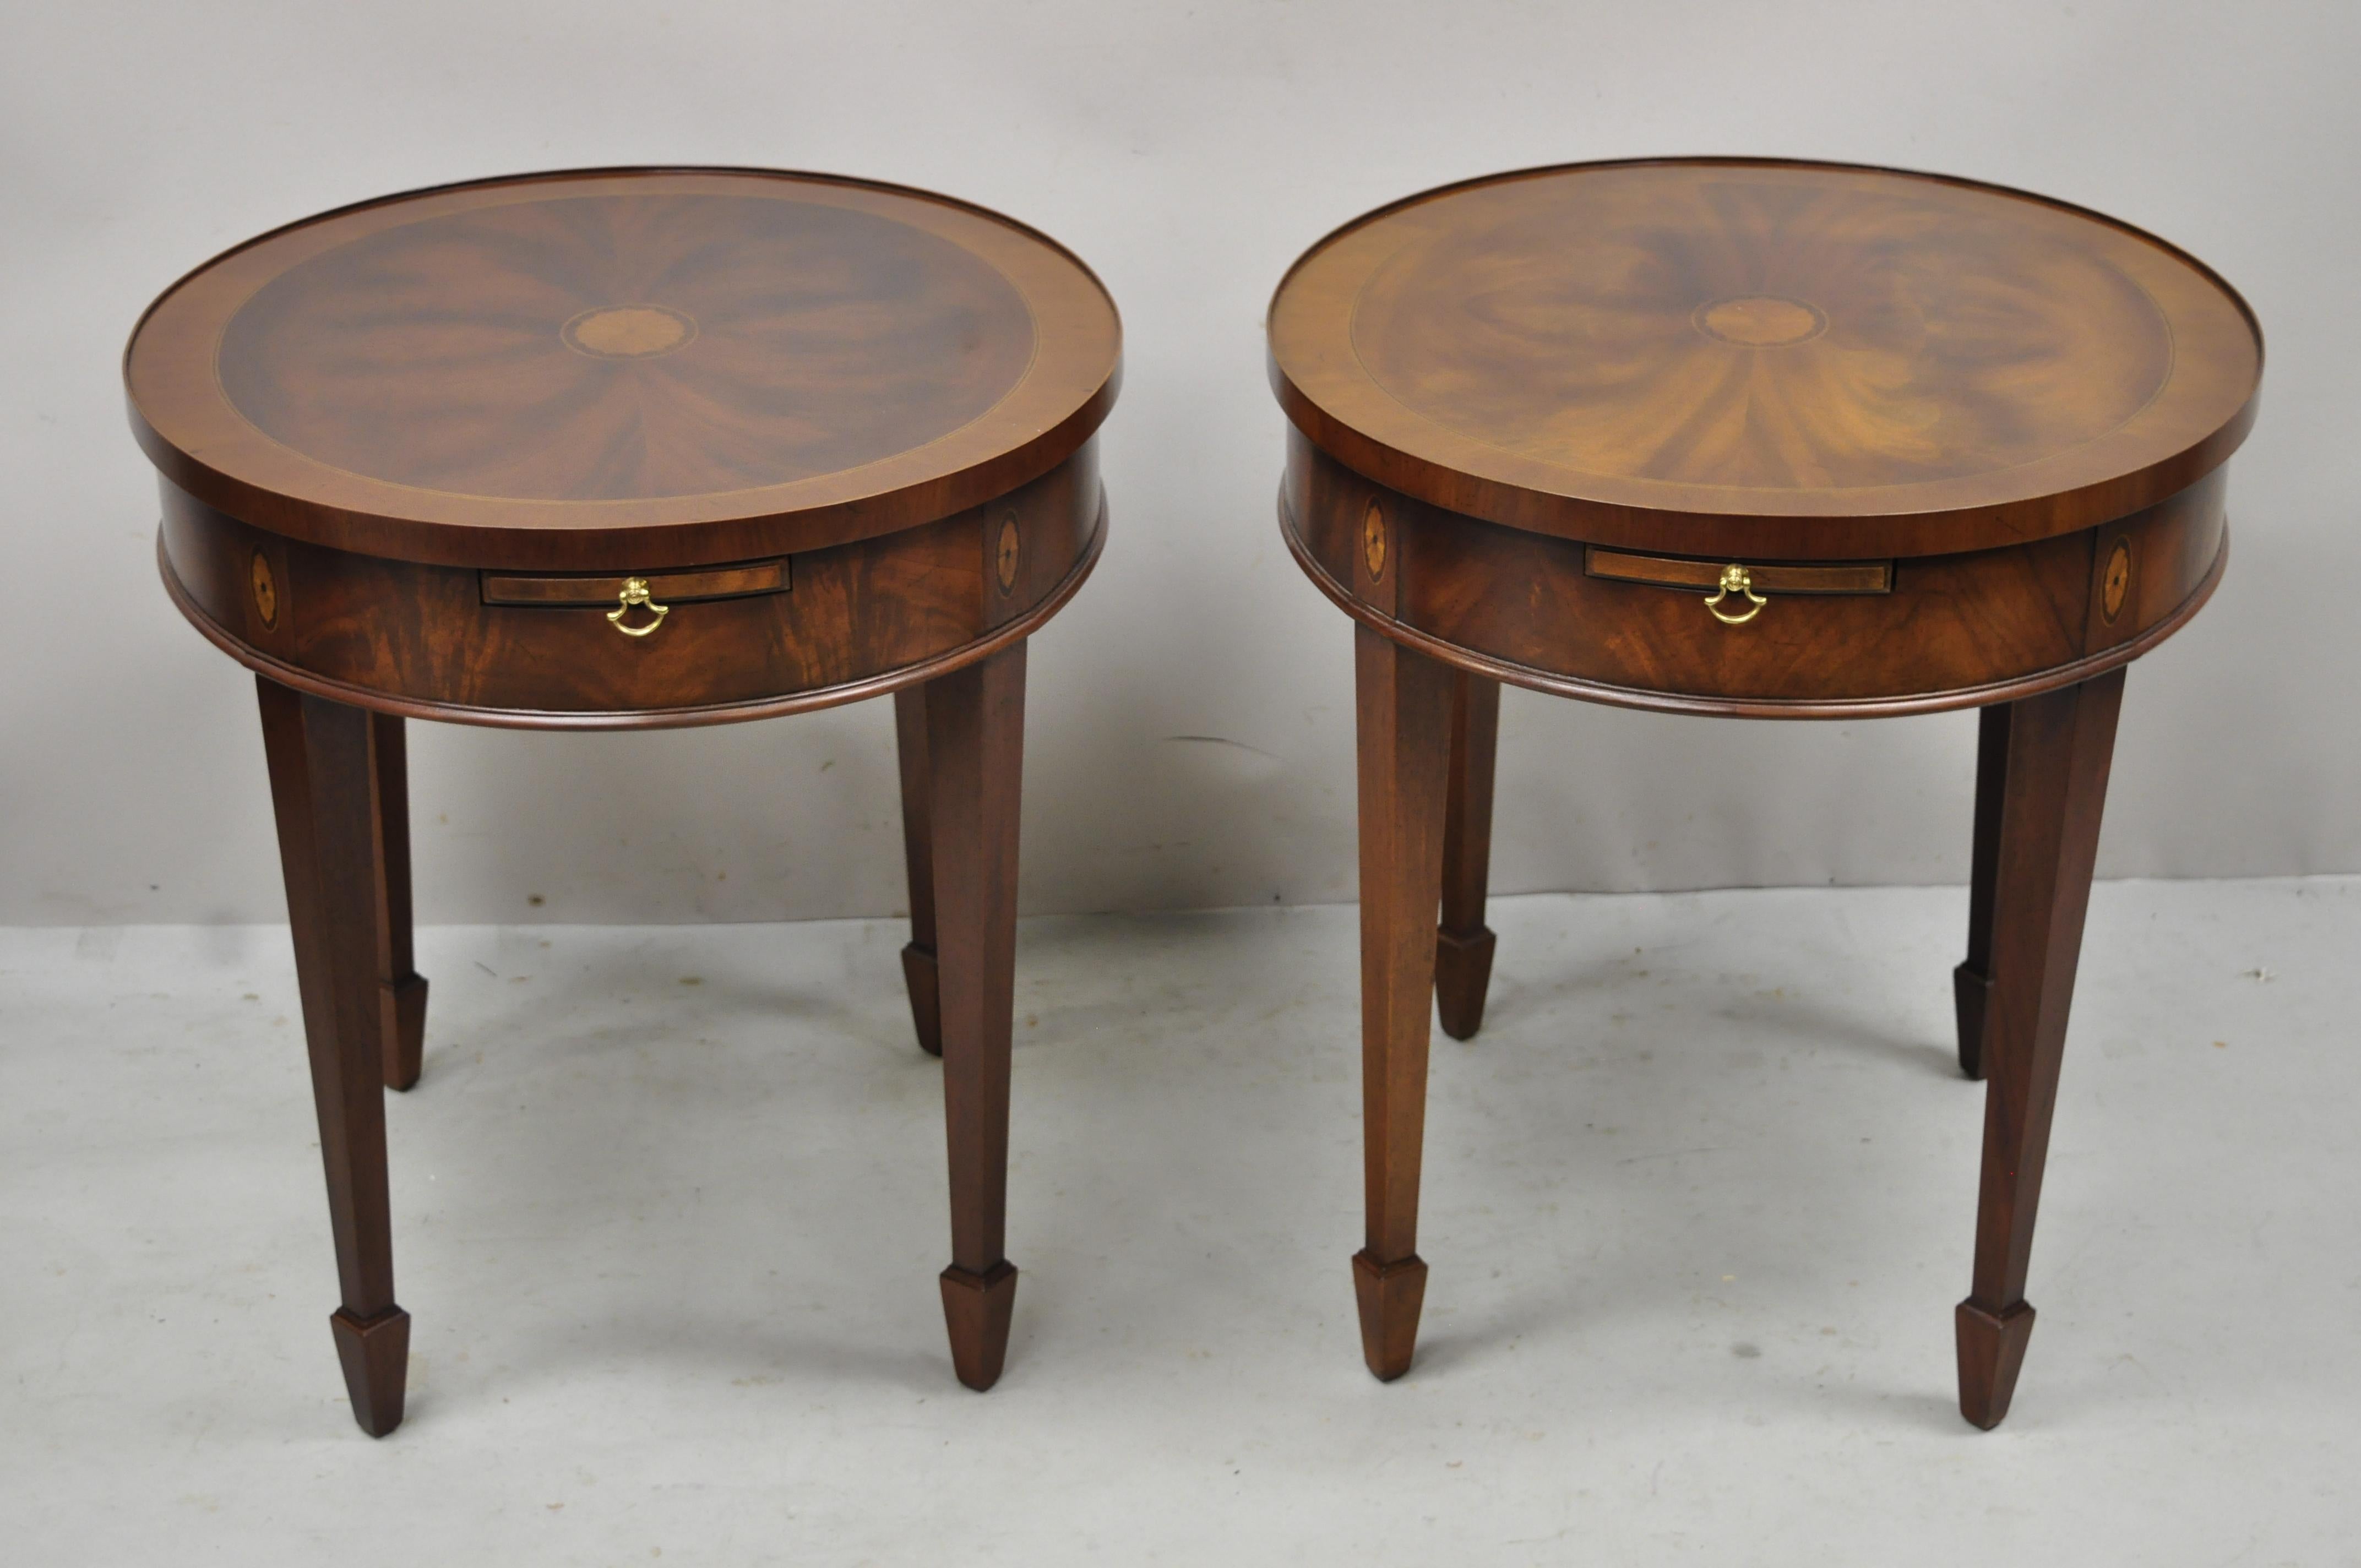 Vintage mahogany pinwheel inlay oval Federal lamp end table with pull out surface - a pair. Item features pull out surfaces, pinwheel inlay top and skirt, beautiful wood grain, quality American craftsmanship, great style and form. Circa mid to late